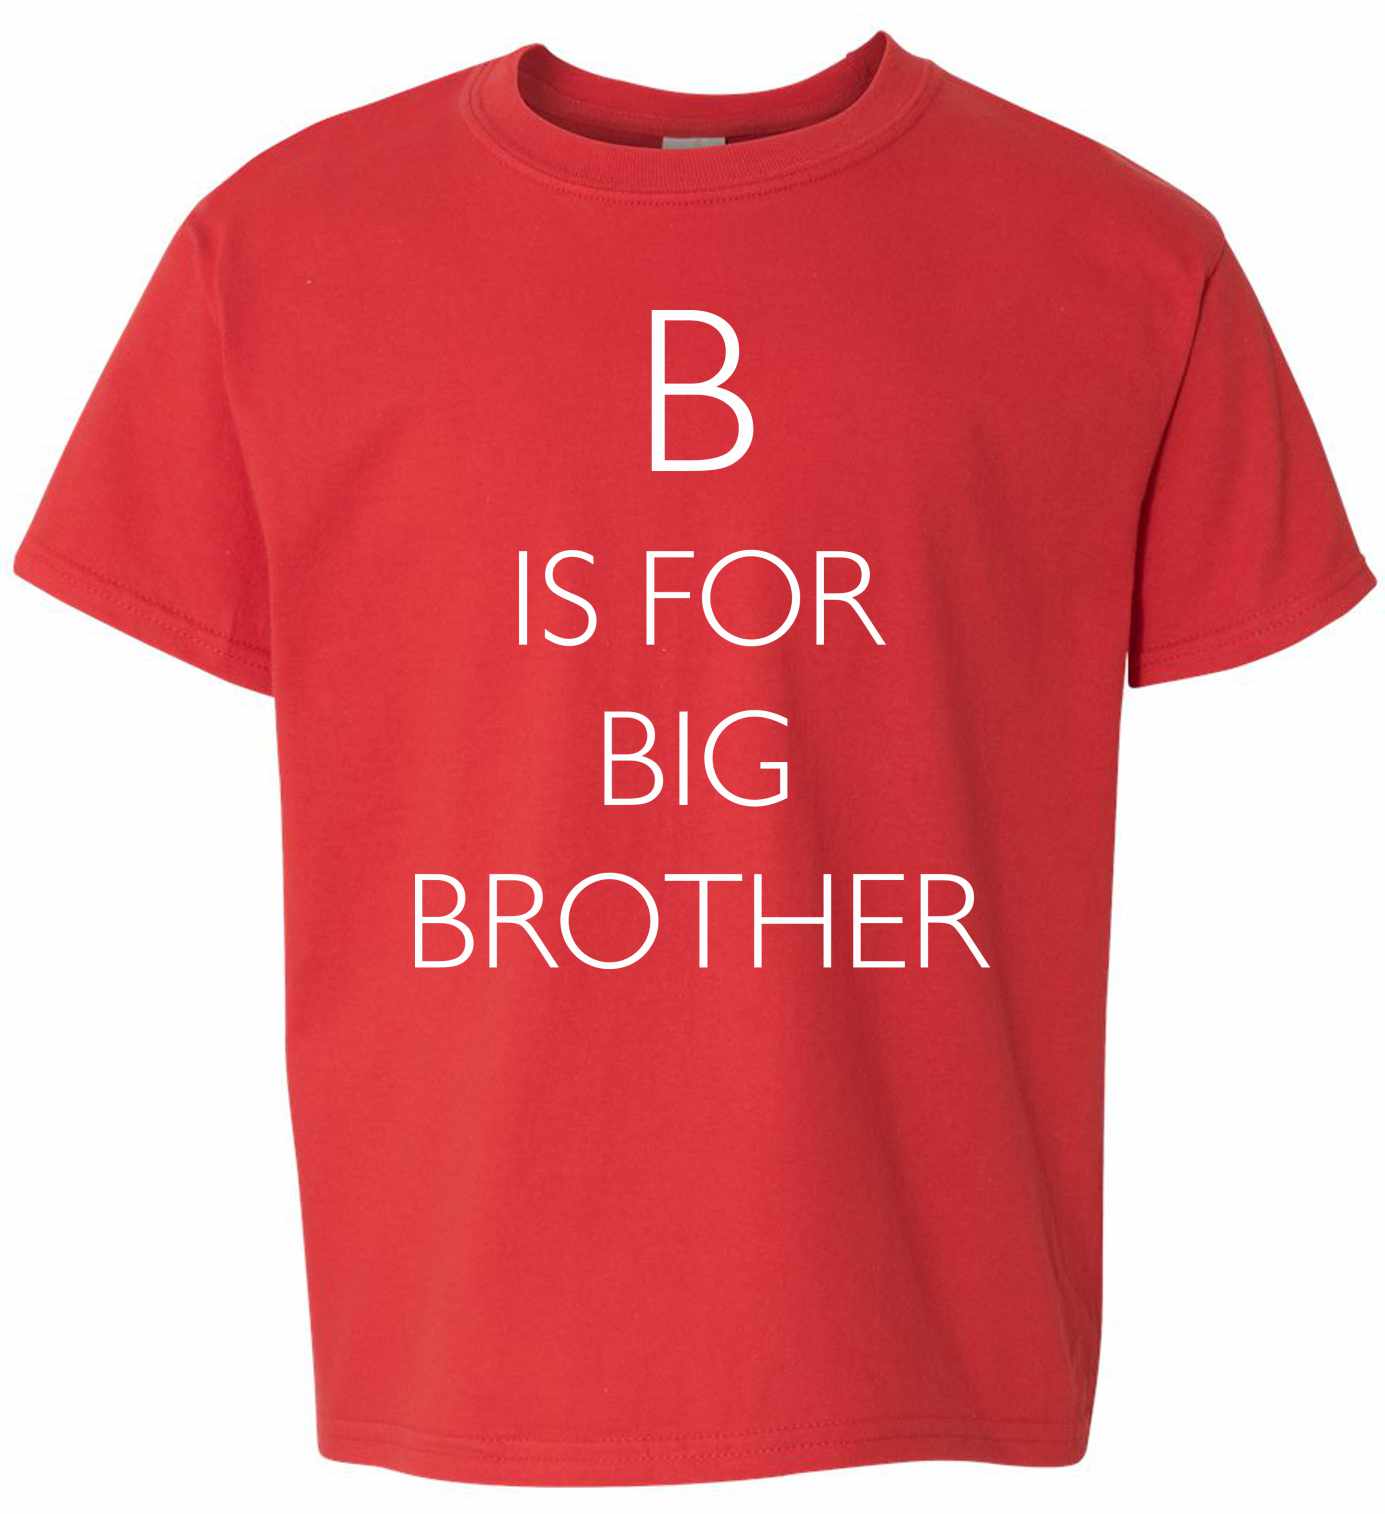 B is for Big Brother Youth T-Shirt